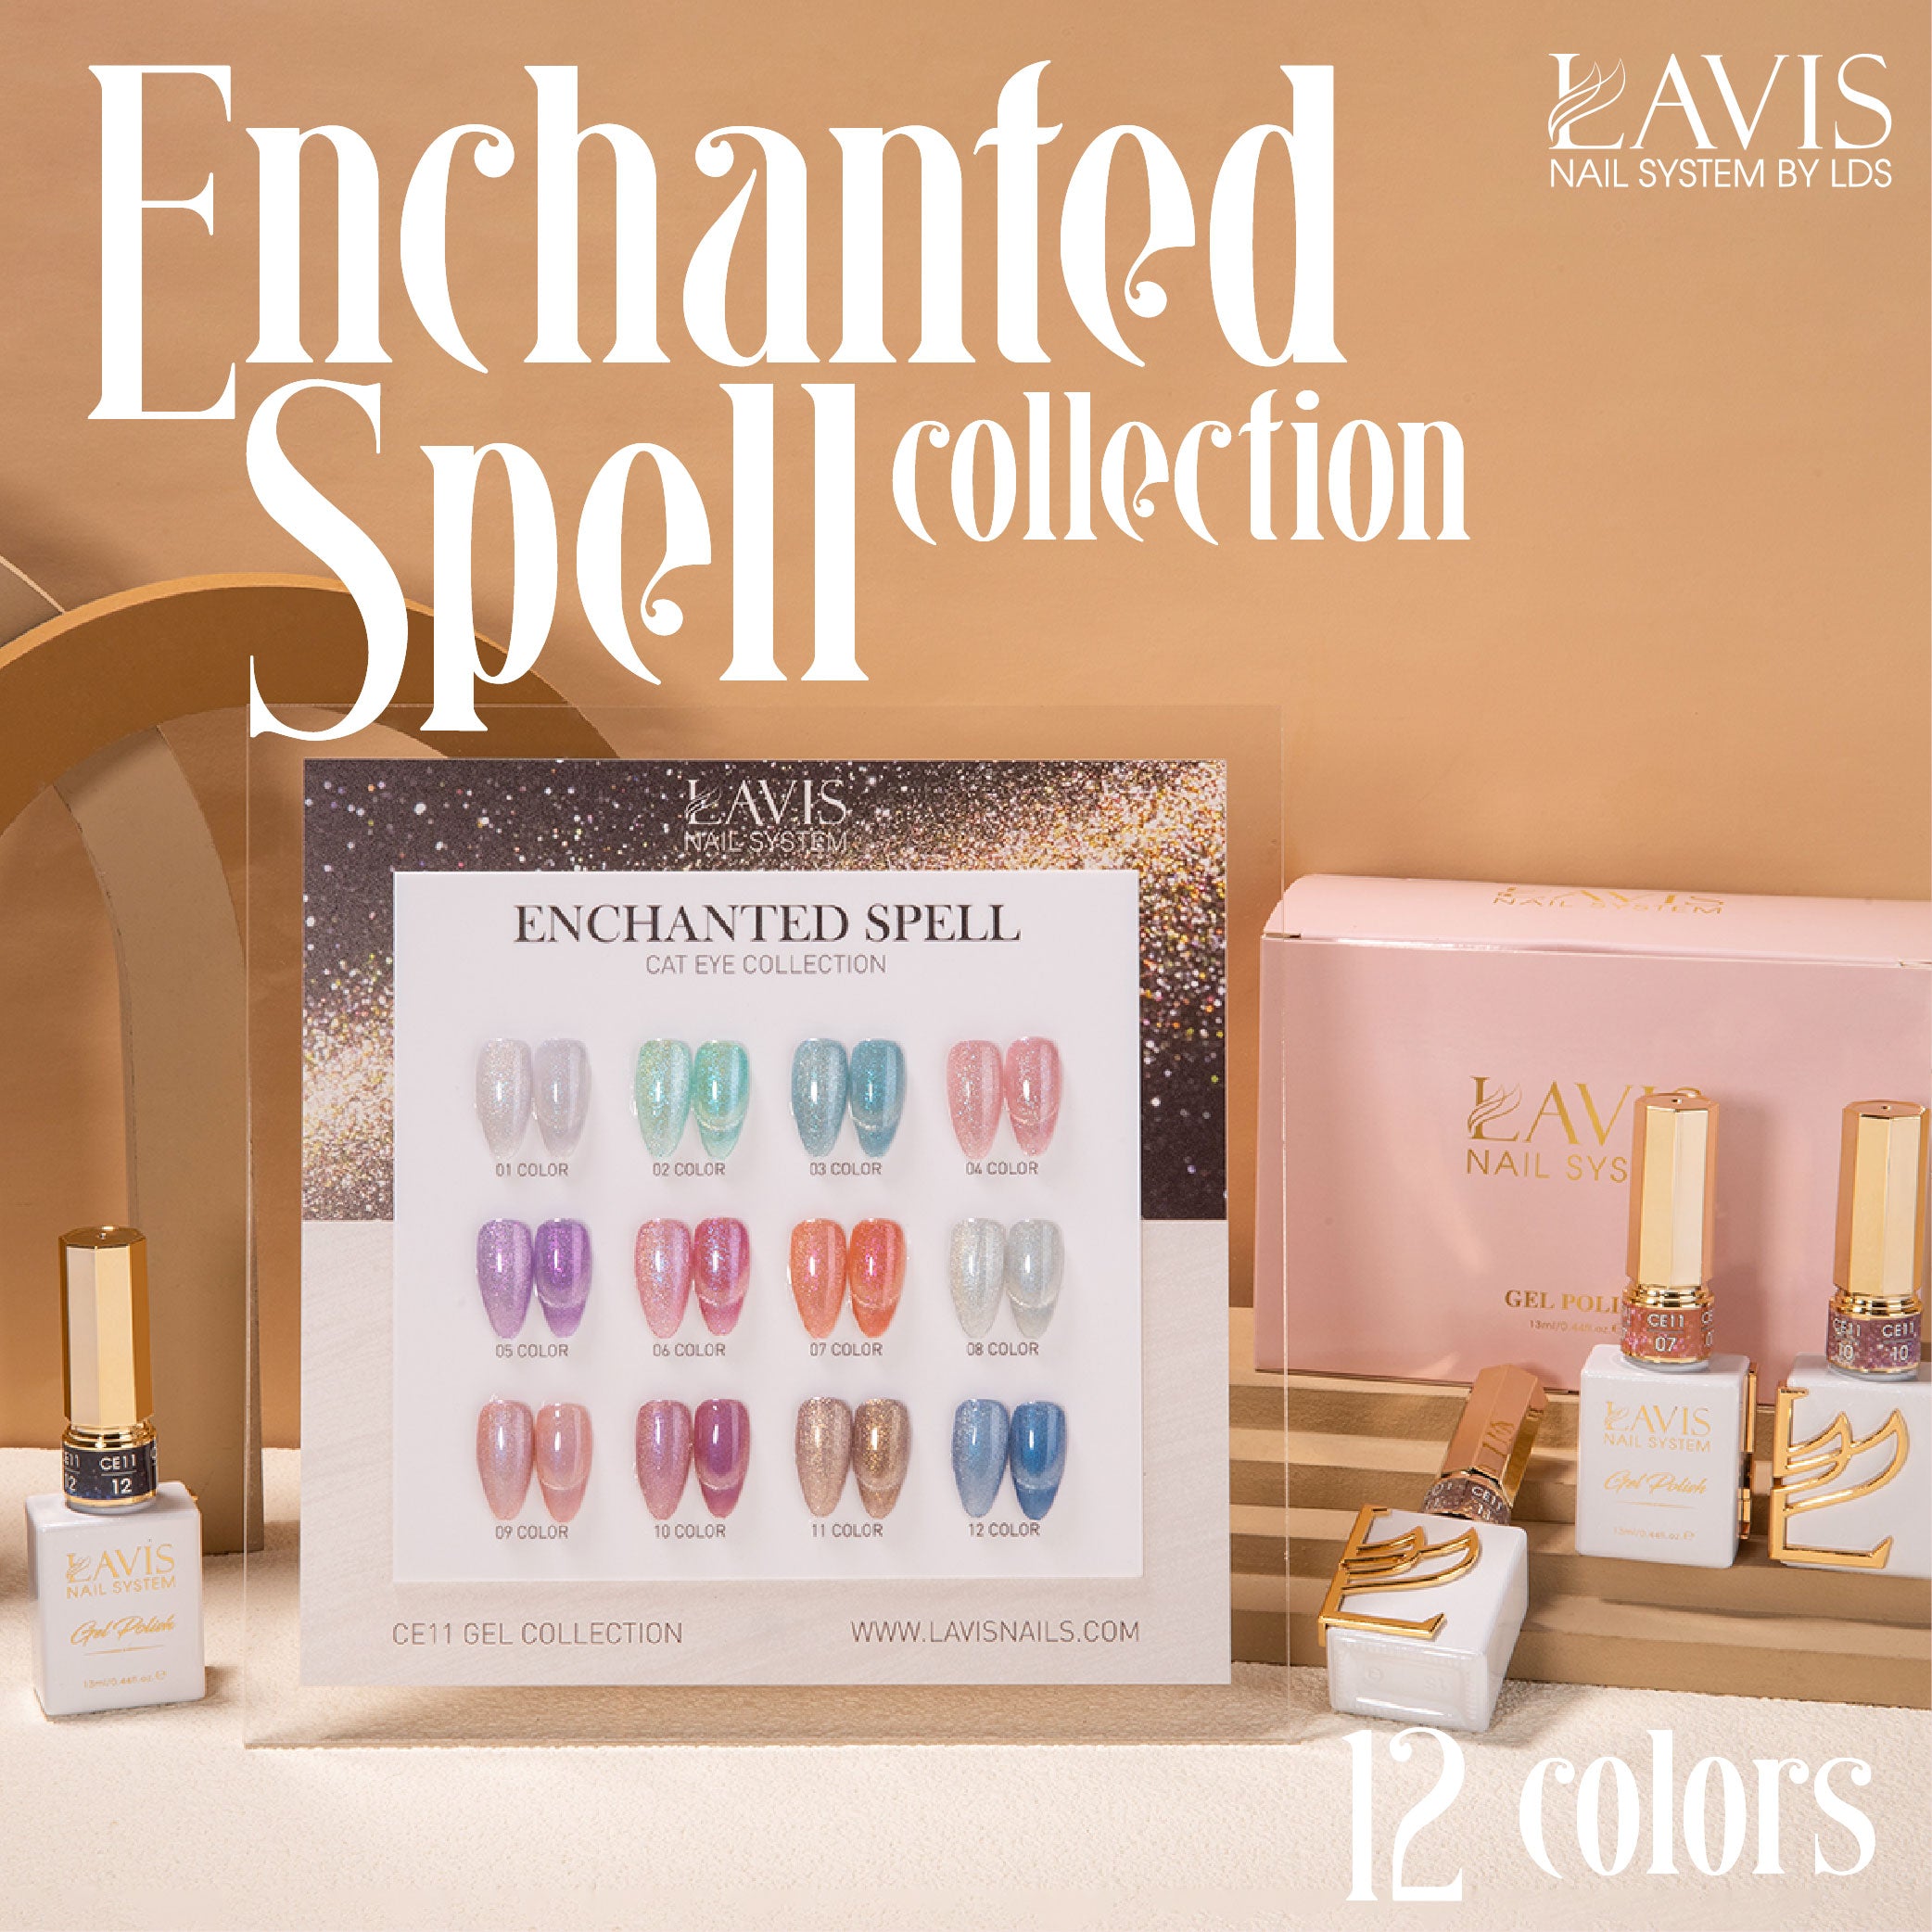 LAVIS Cat Eyes CE11 - 12 - Gel Polish 0.5 oz - Enchanted Spell Collection